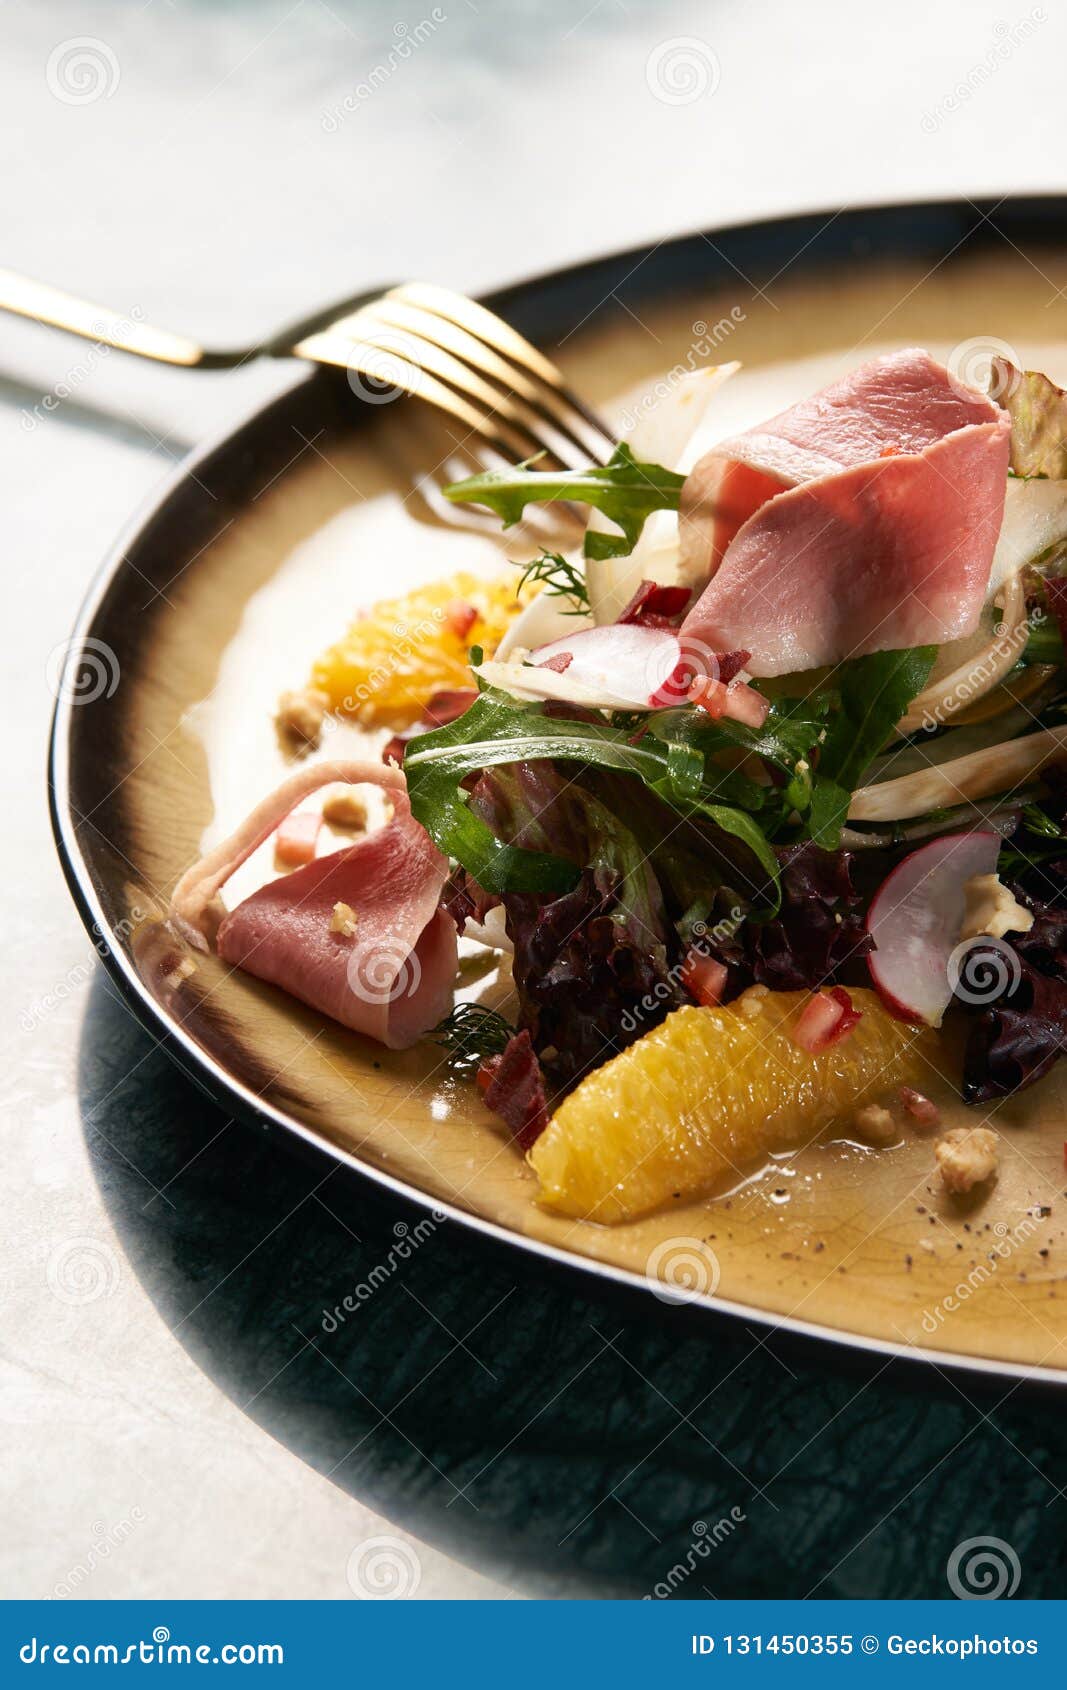 Close-up Vegetable Salad with Smoked Duck Breast. Stock Image - Image ...